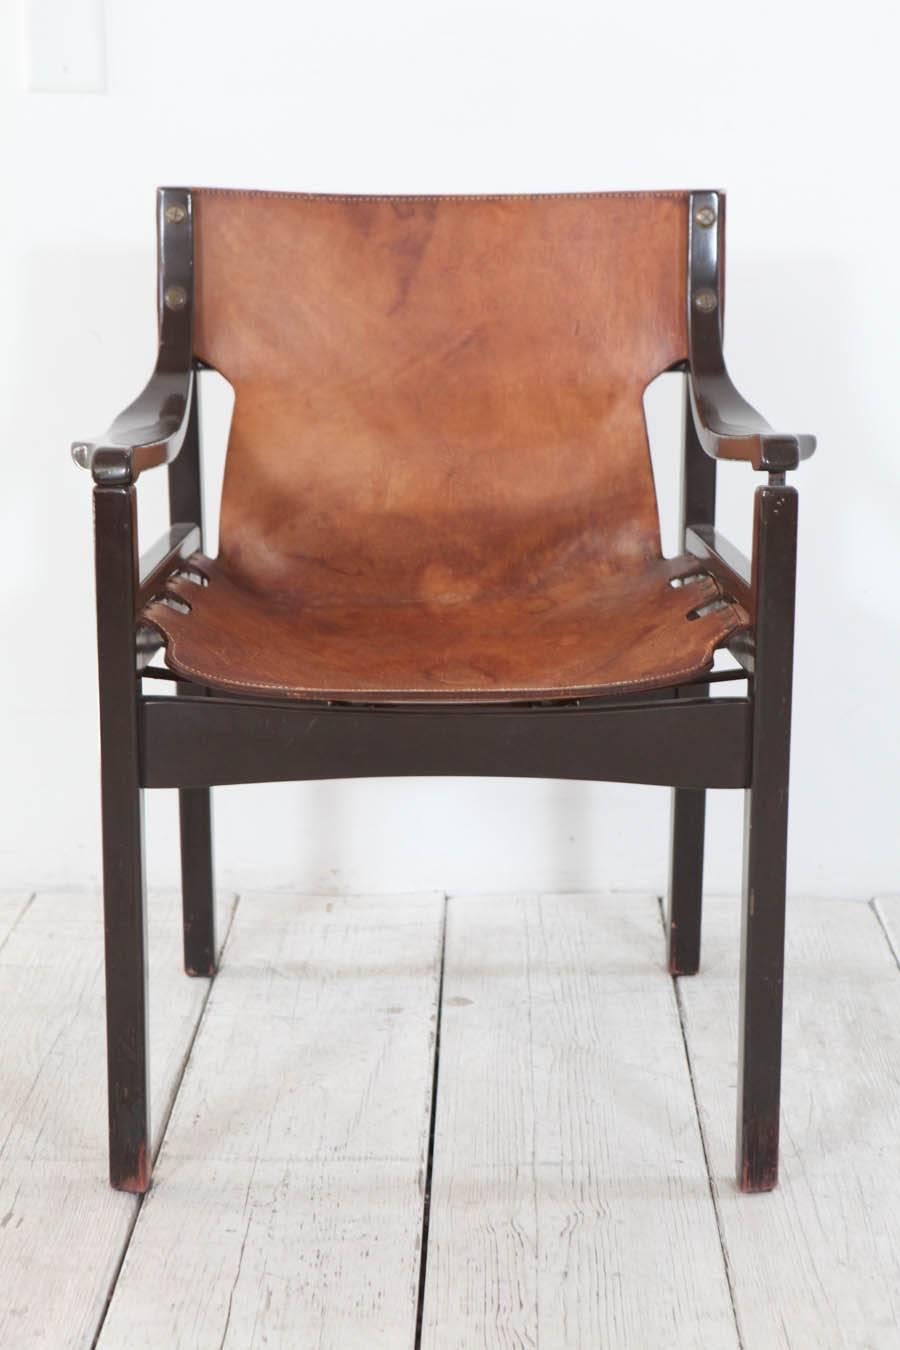 Chocolate brown enameled bentwood armchair with thick leather sling seat.